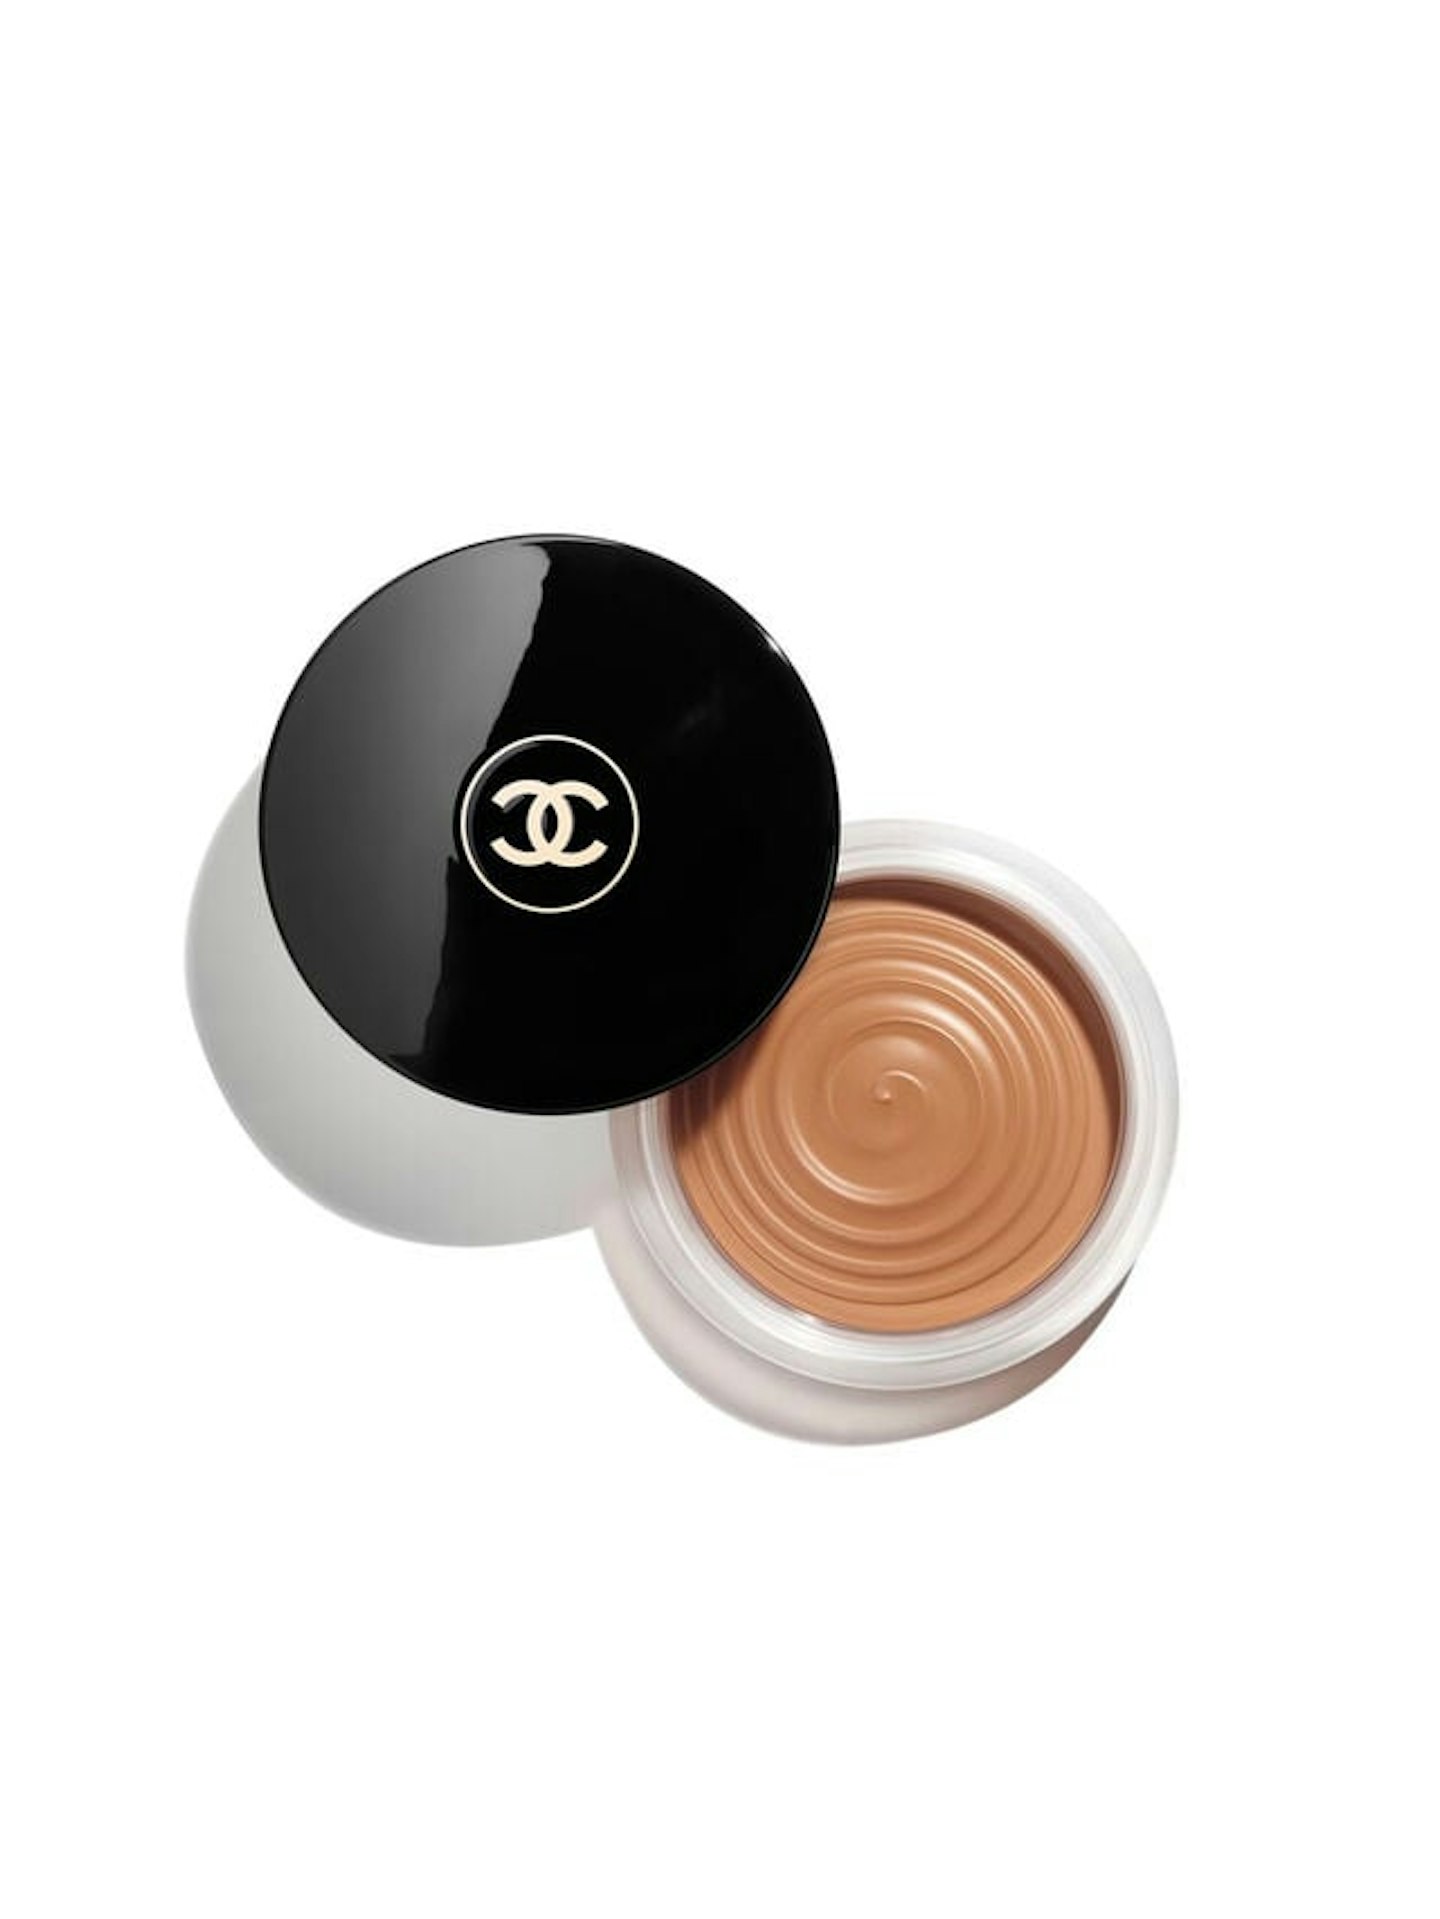 Chanel Les Beiges Bronzing Cream Review: It's Worth the Price